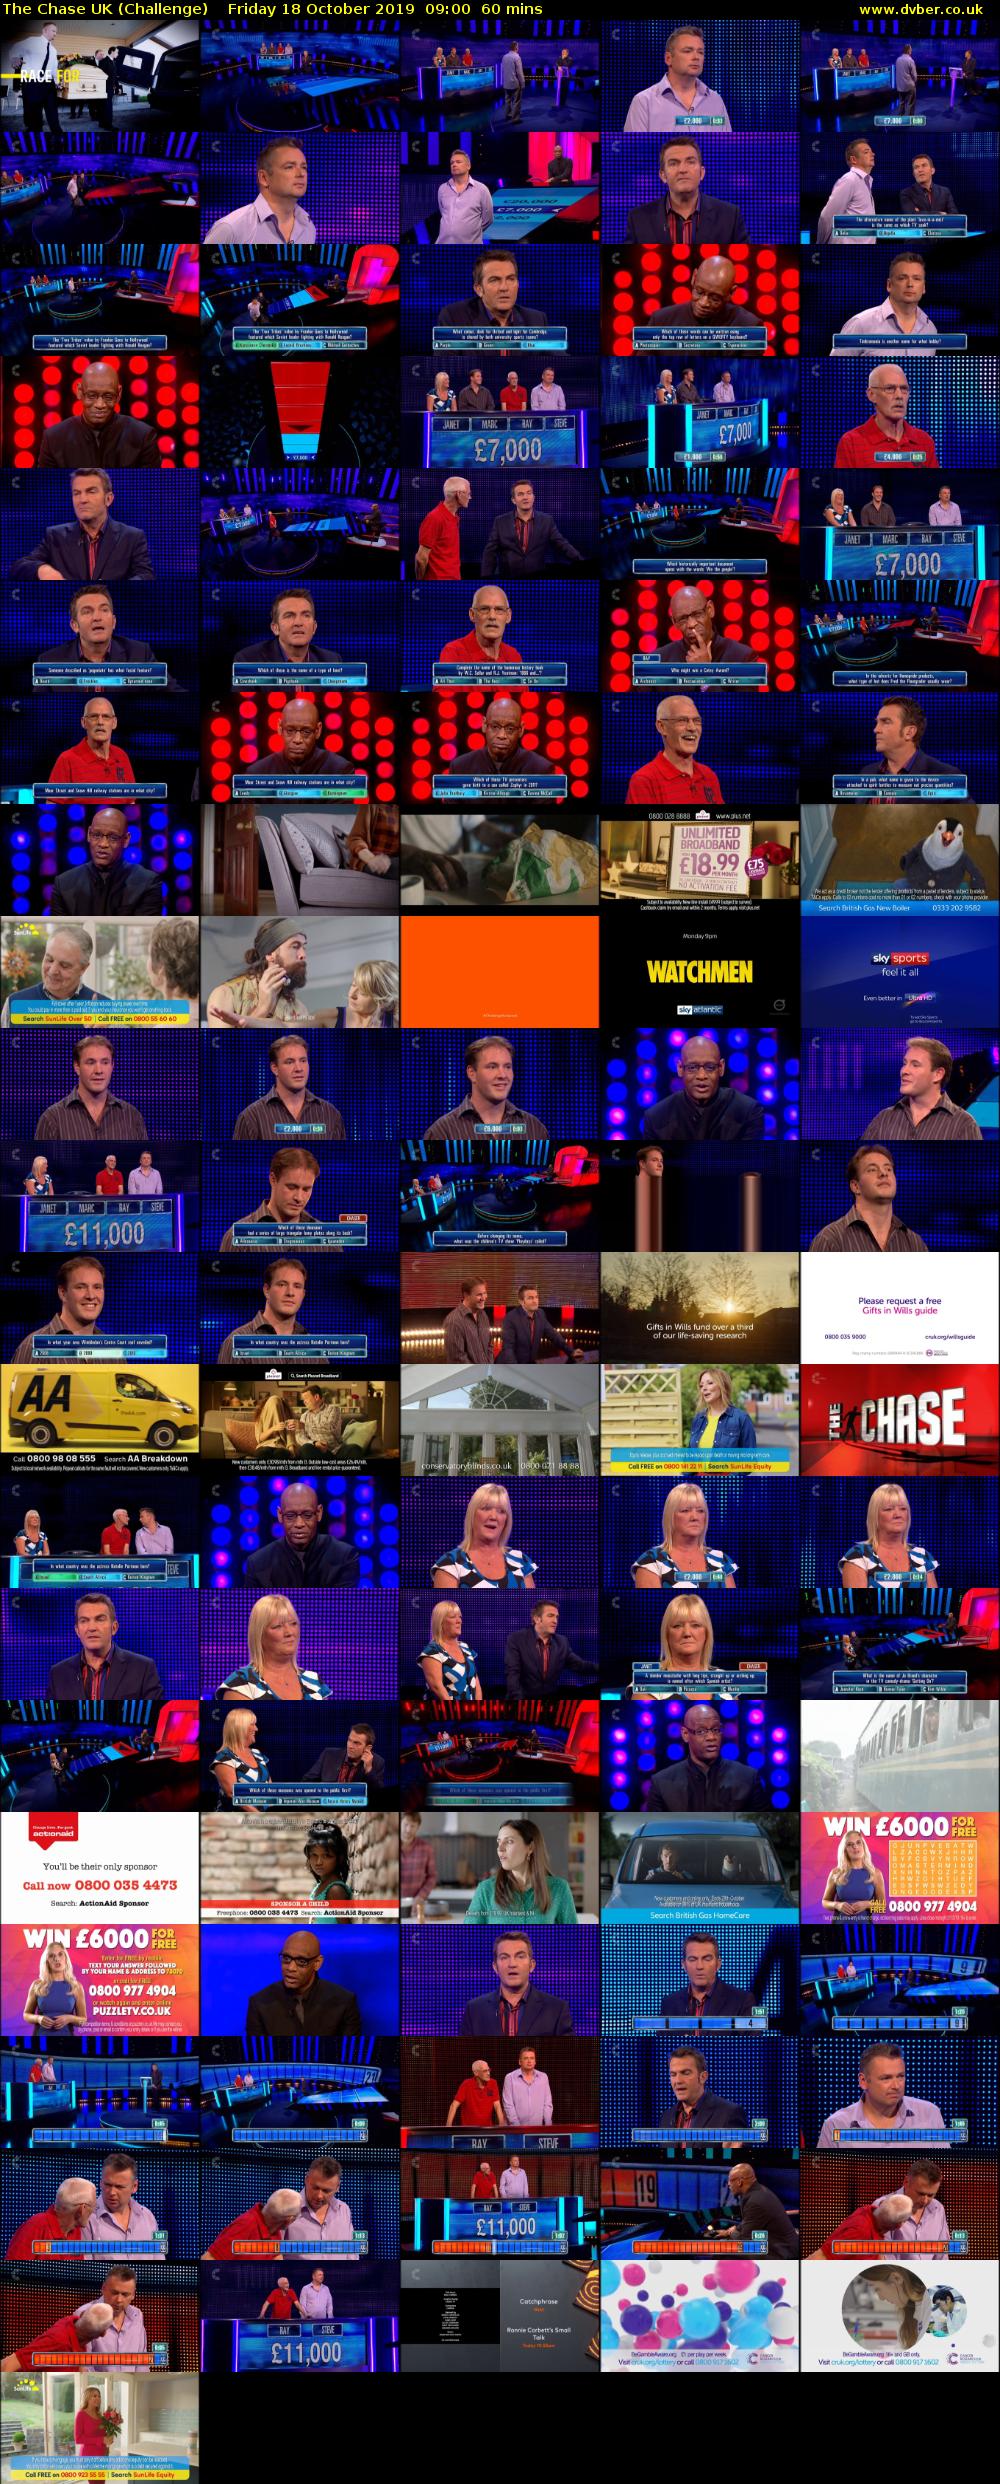 The Chase UK (Challenge) Friday 18 October 2019 09:00 - 10:00